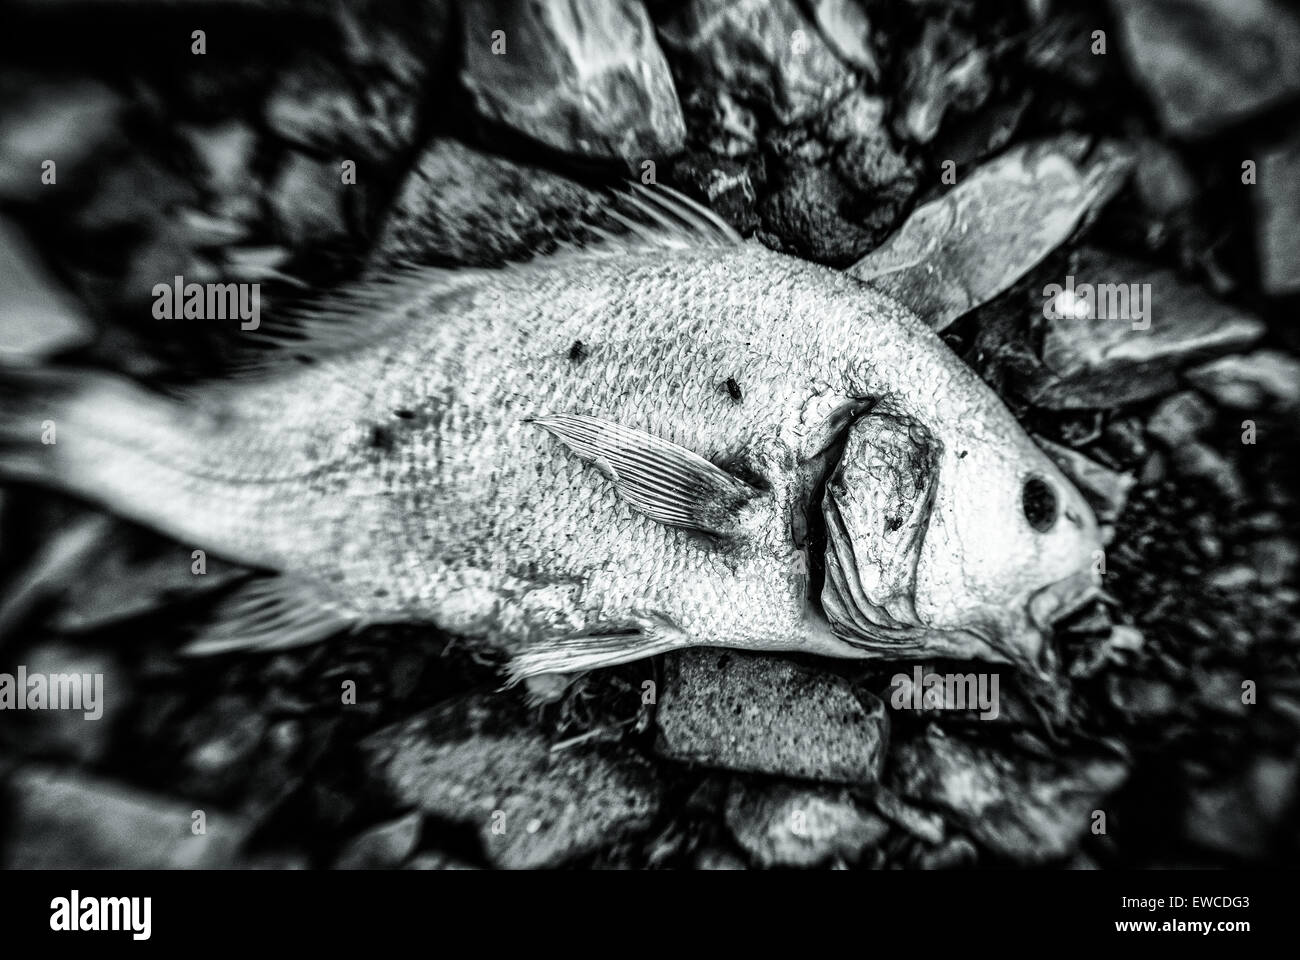 Black and White corpse of a fish lies on the bank of the river. Stock Photo